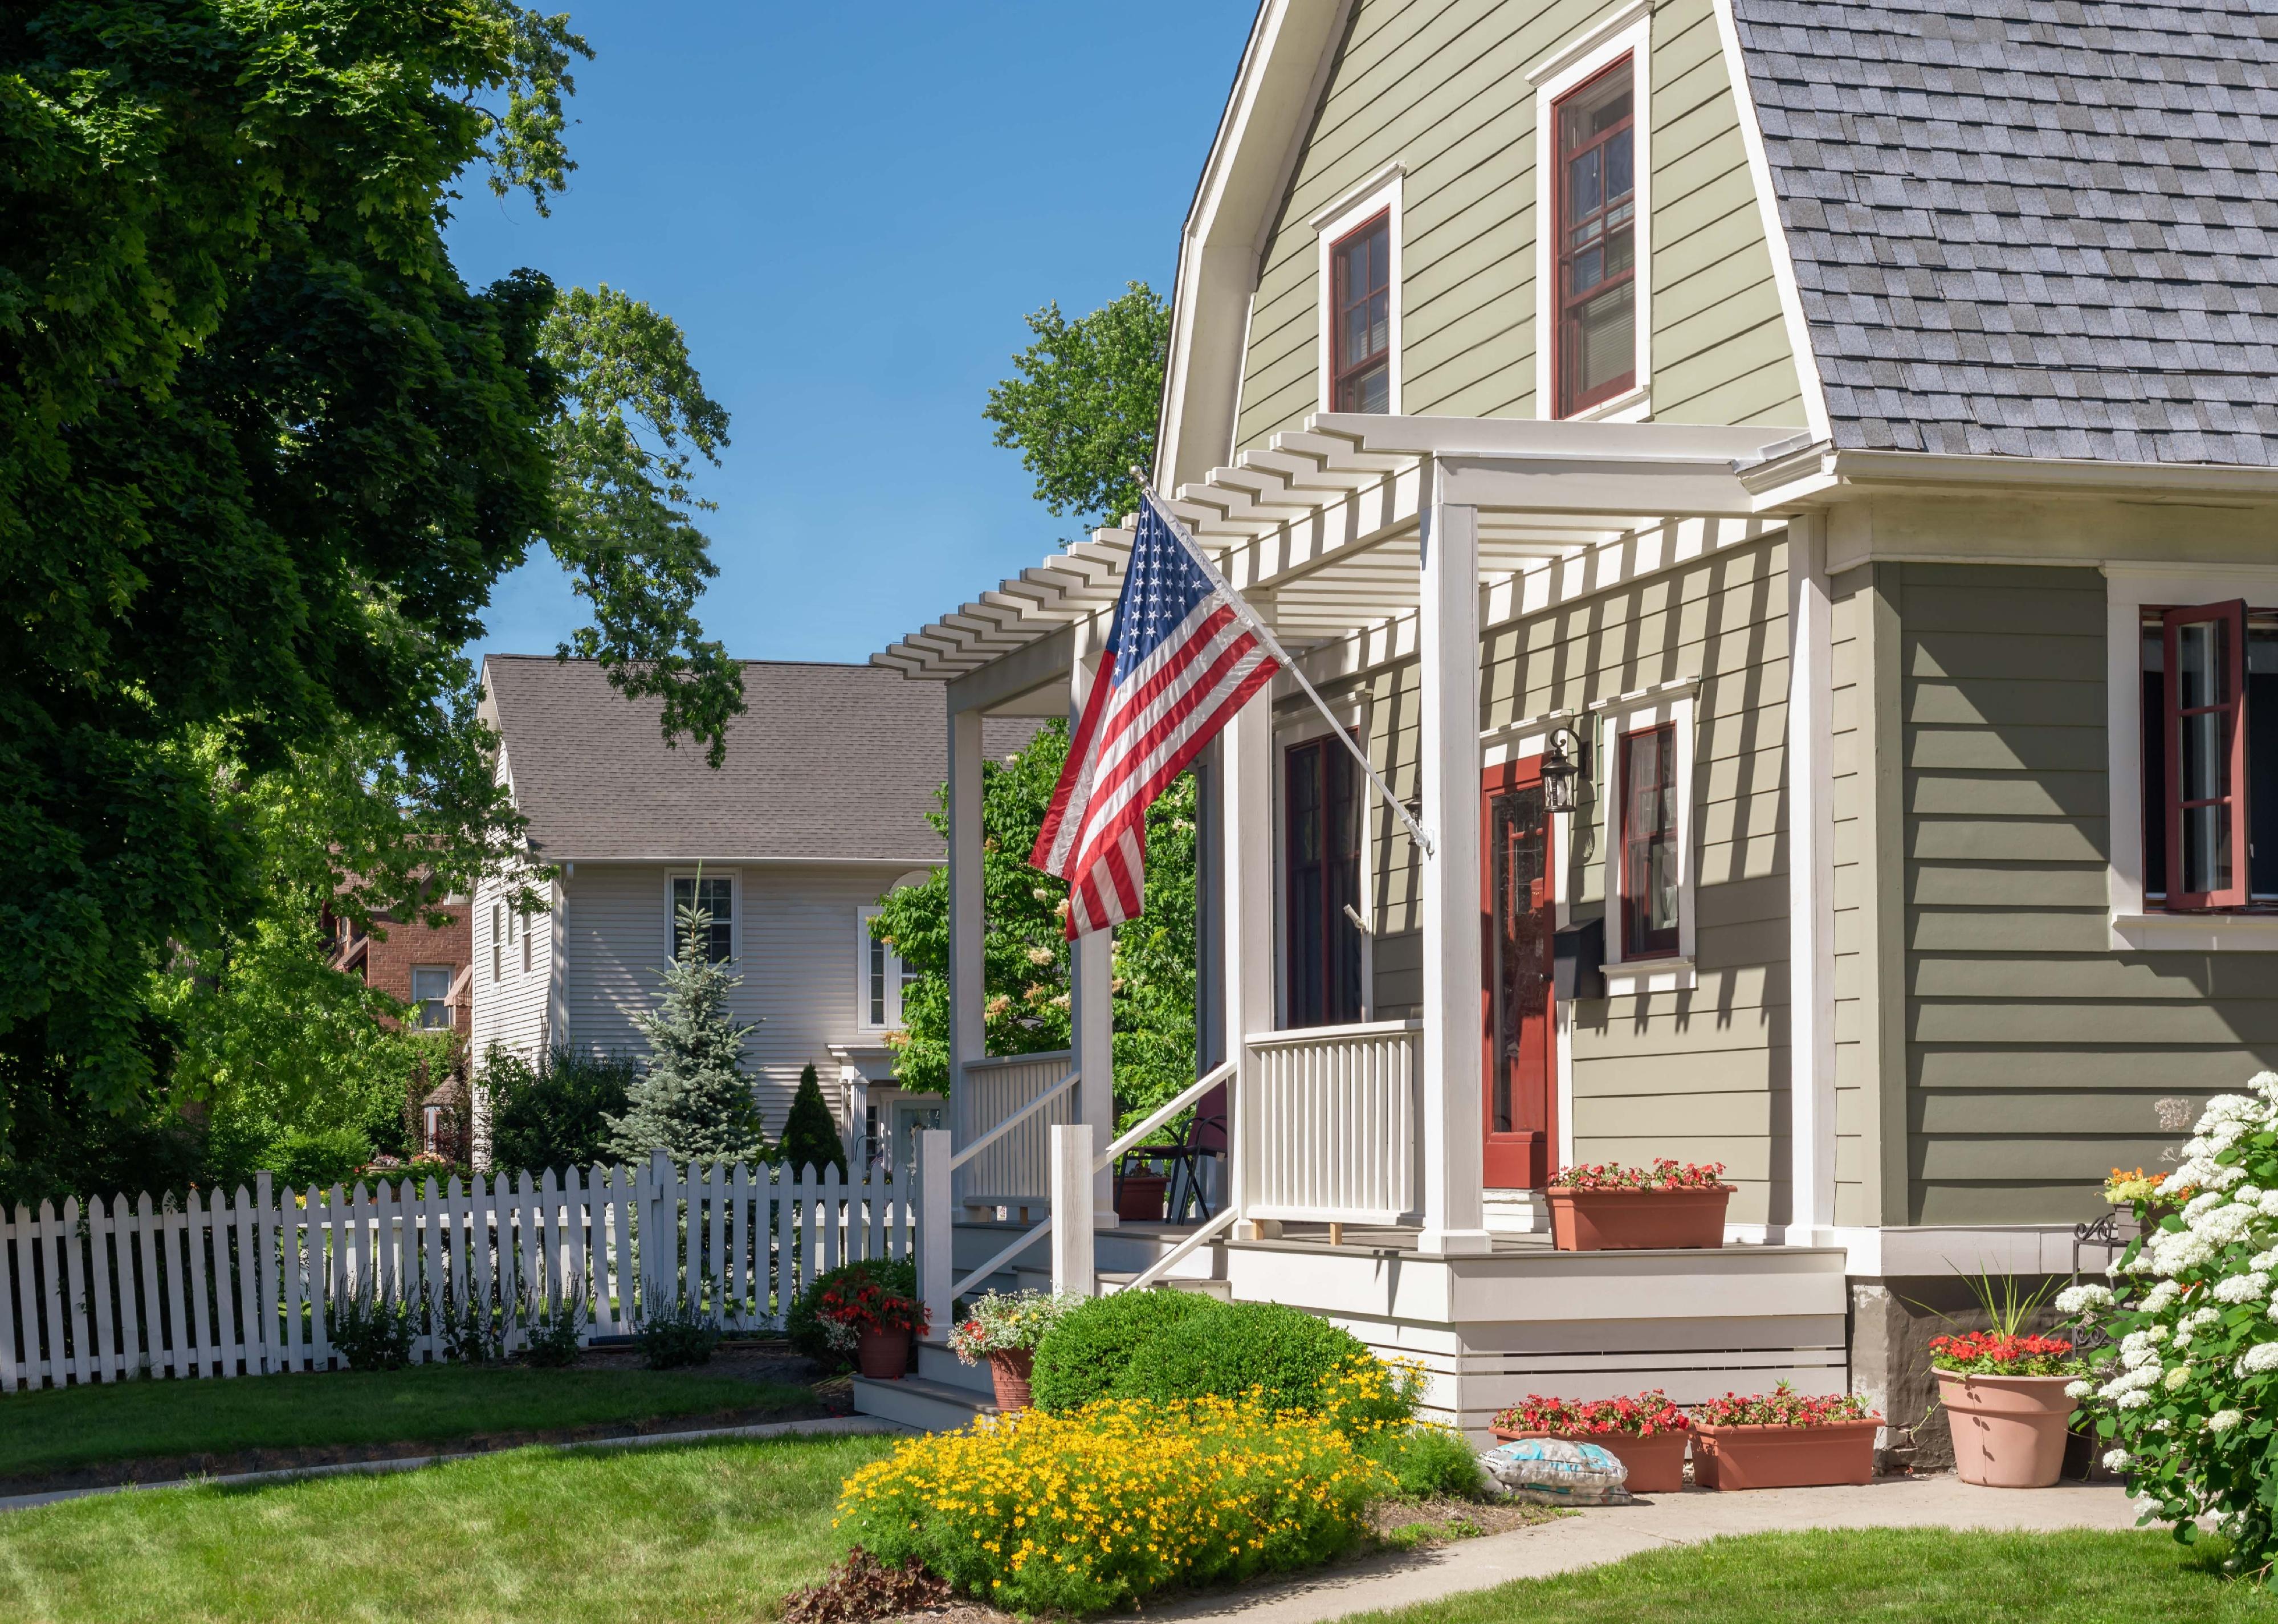 Home with U.S. flag and pergola front porch.